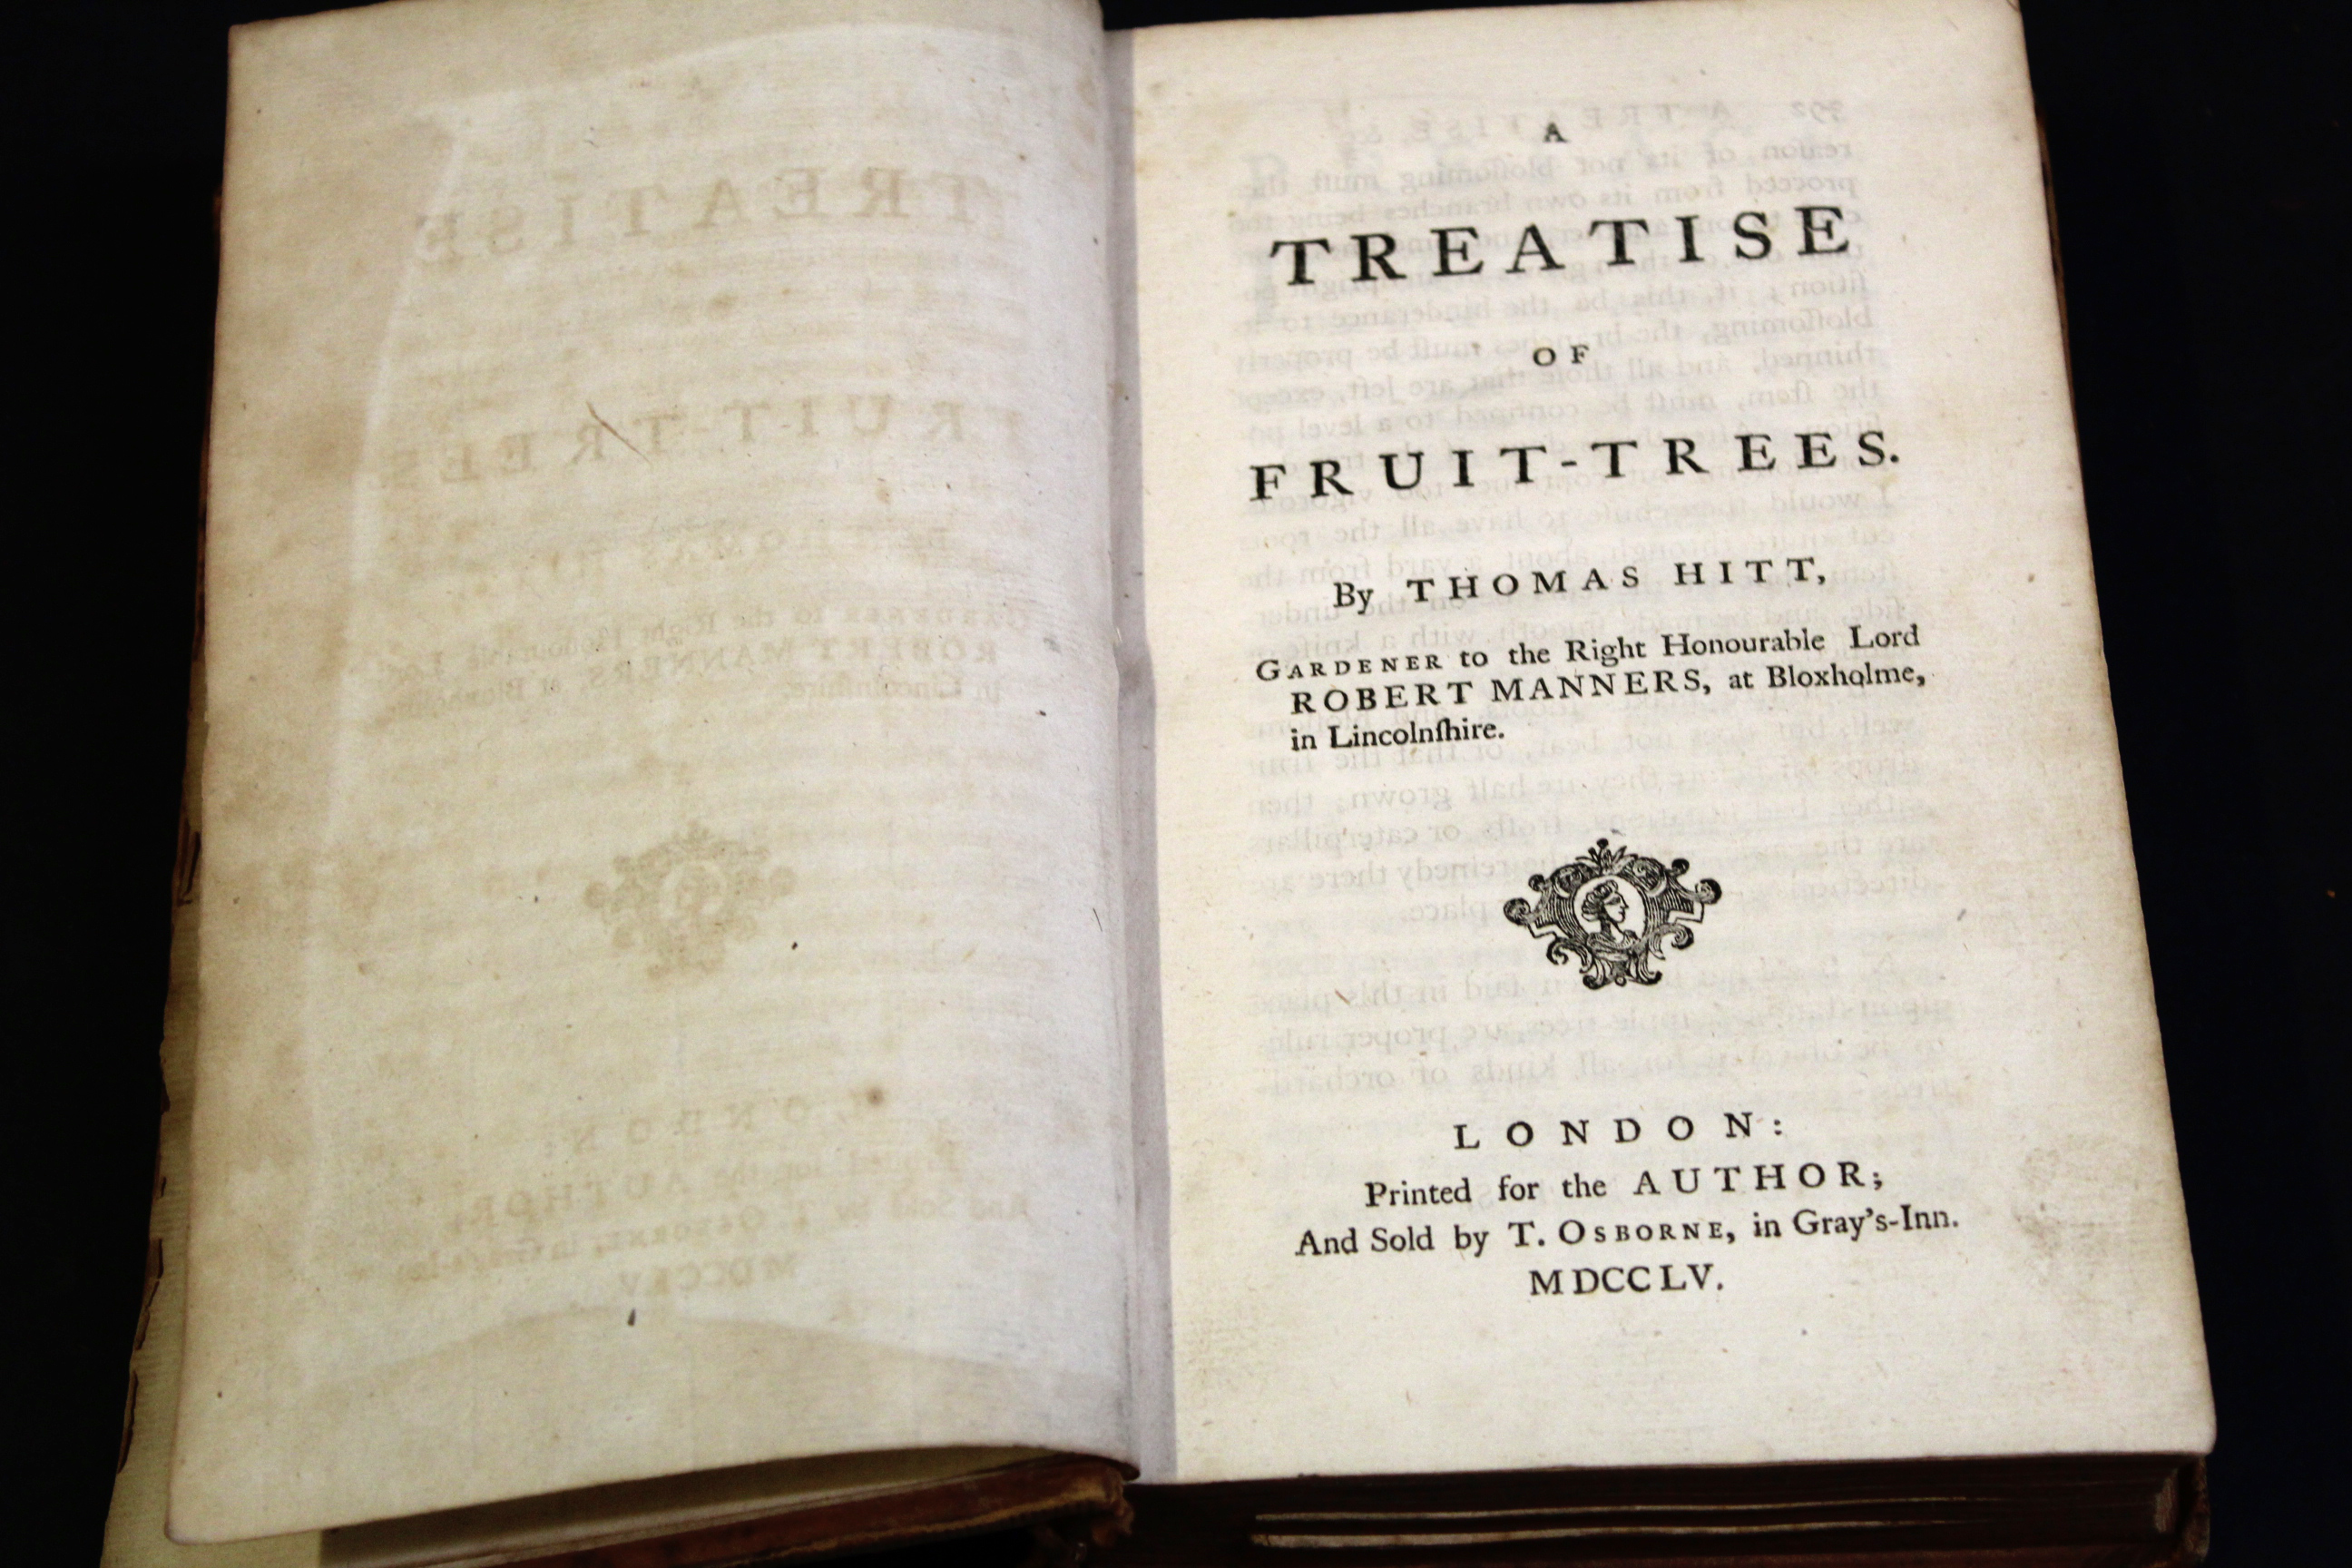 THOMAS HITT: A TREATISE OF FRUIT-TREES, London for the author and sold by T Osborne, 1755, 1st